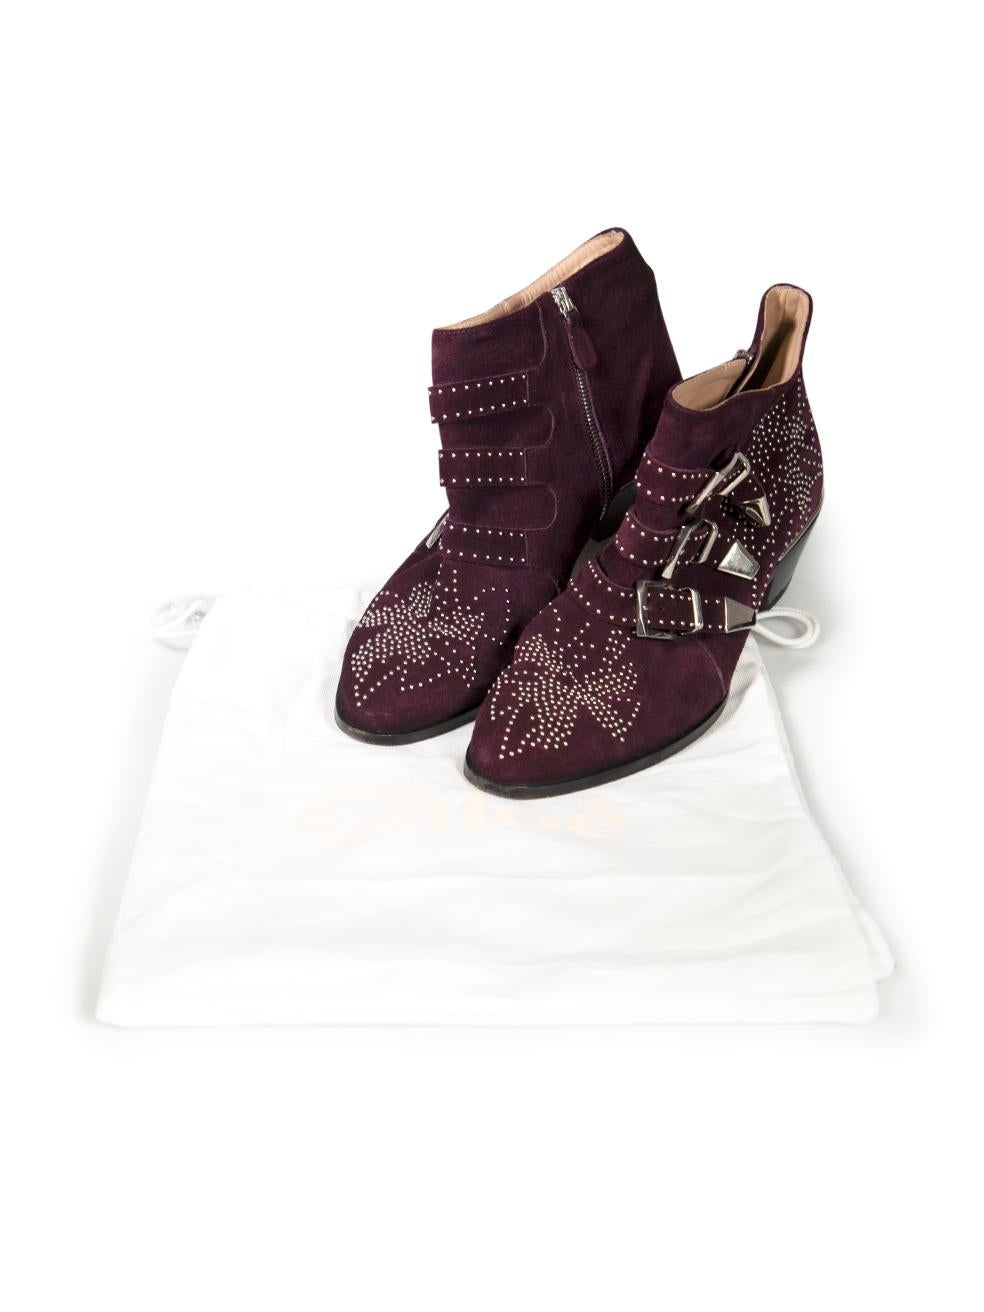 Chloe Purple Suede Susanna Studded Ankle Boots 1